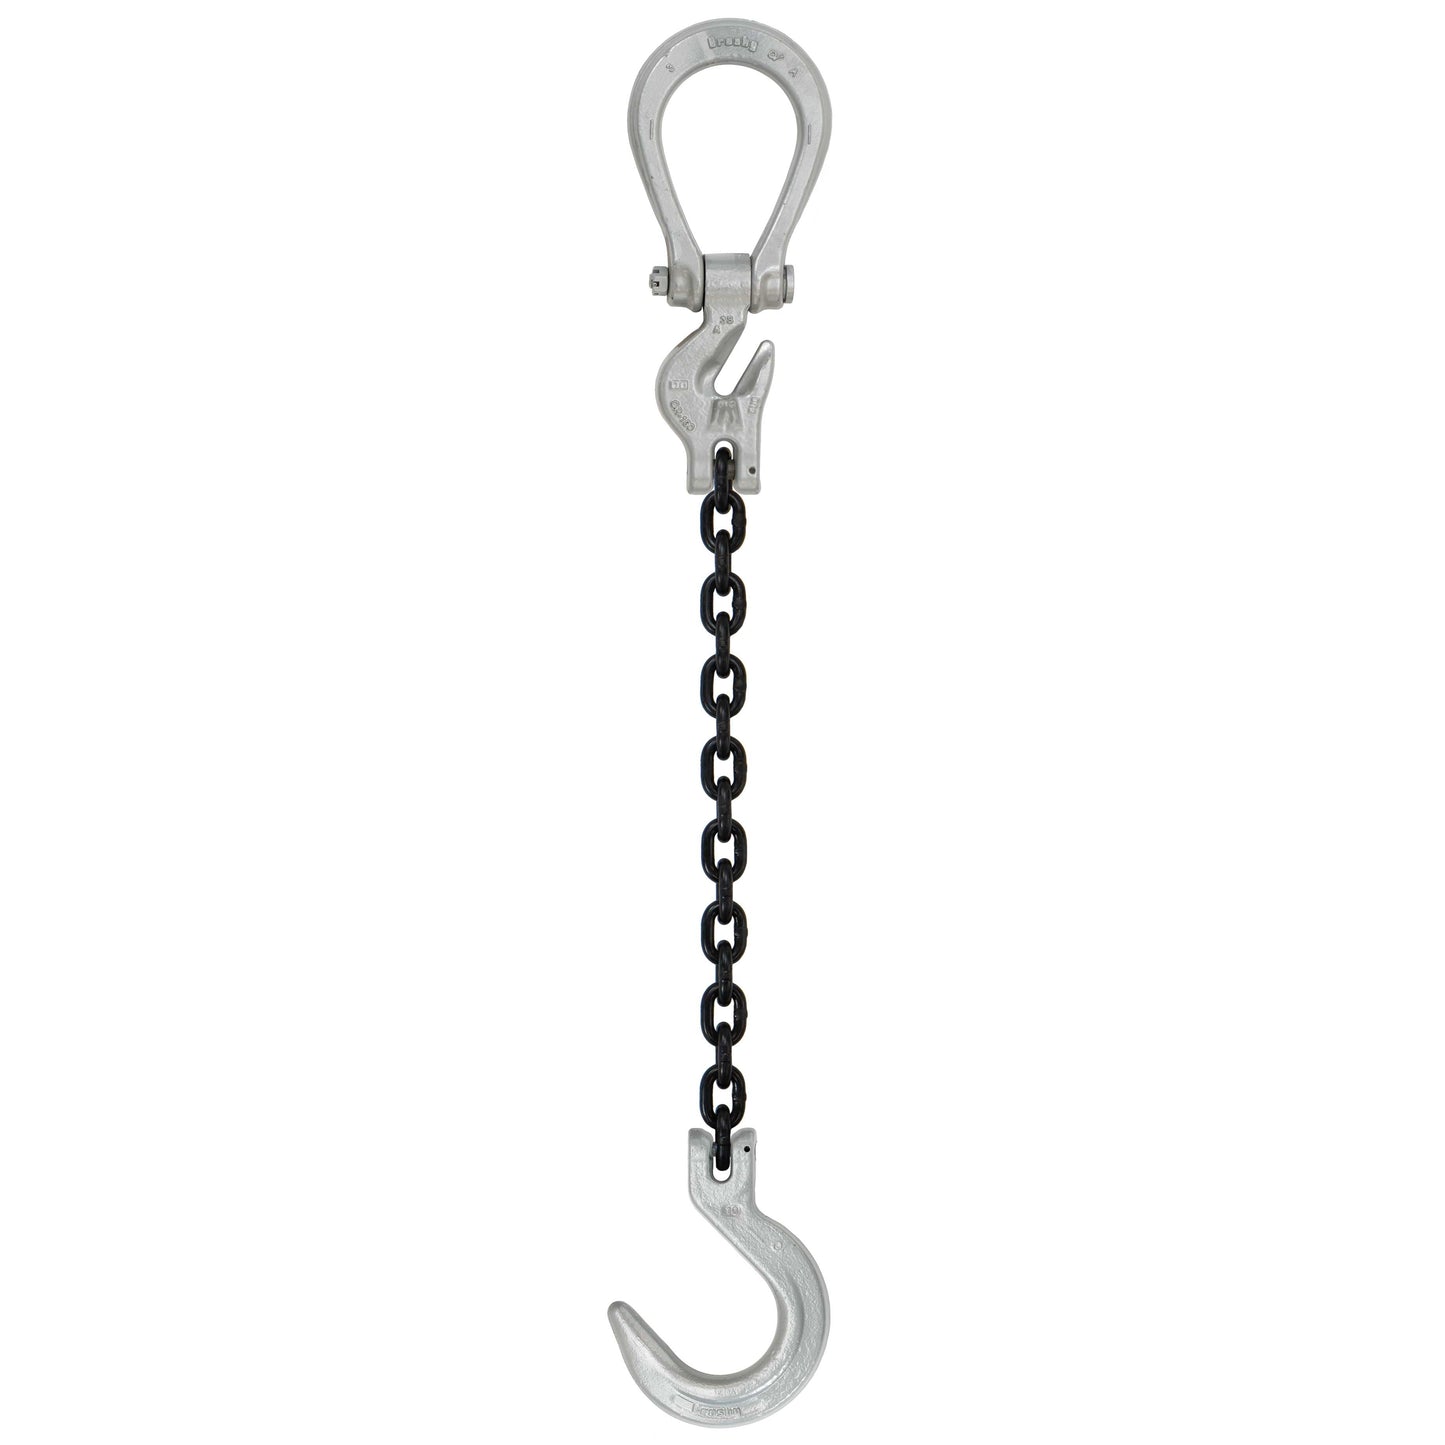 38 inch x 5 foot Domestic Adjustable Single Leg Chain Sling w Crosby Foundry Hook Grade 100 image 1 of 2